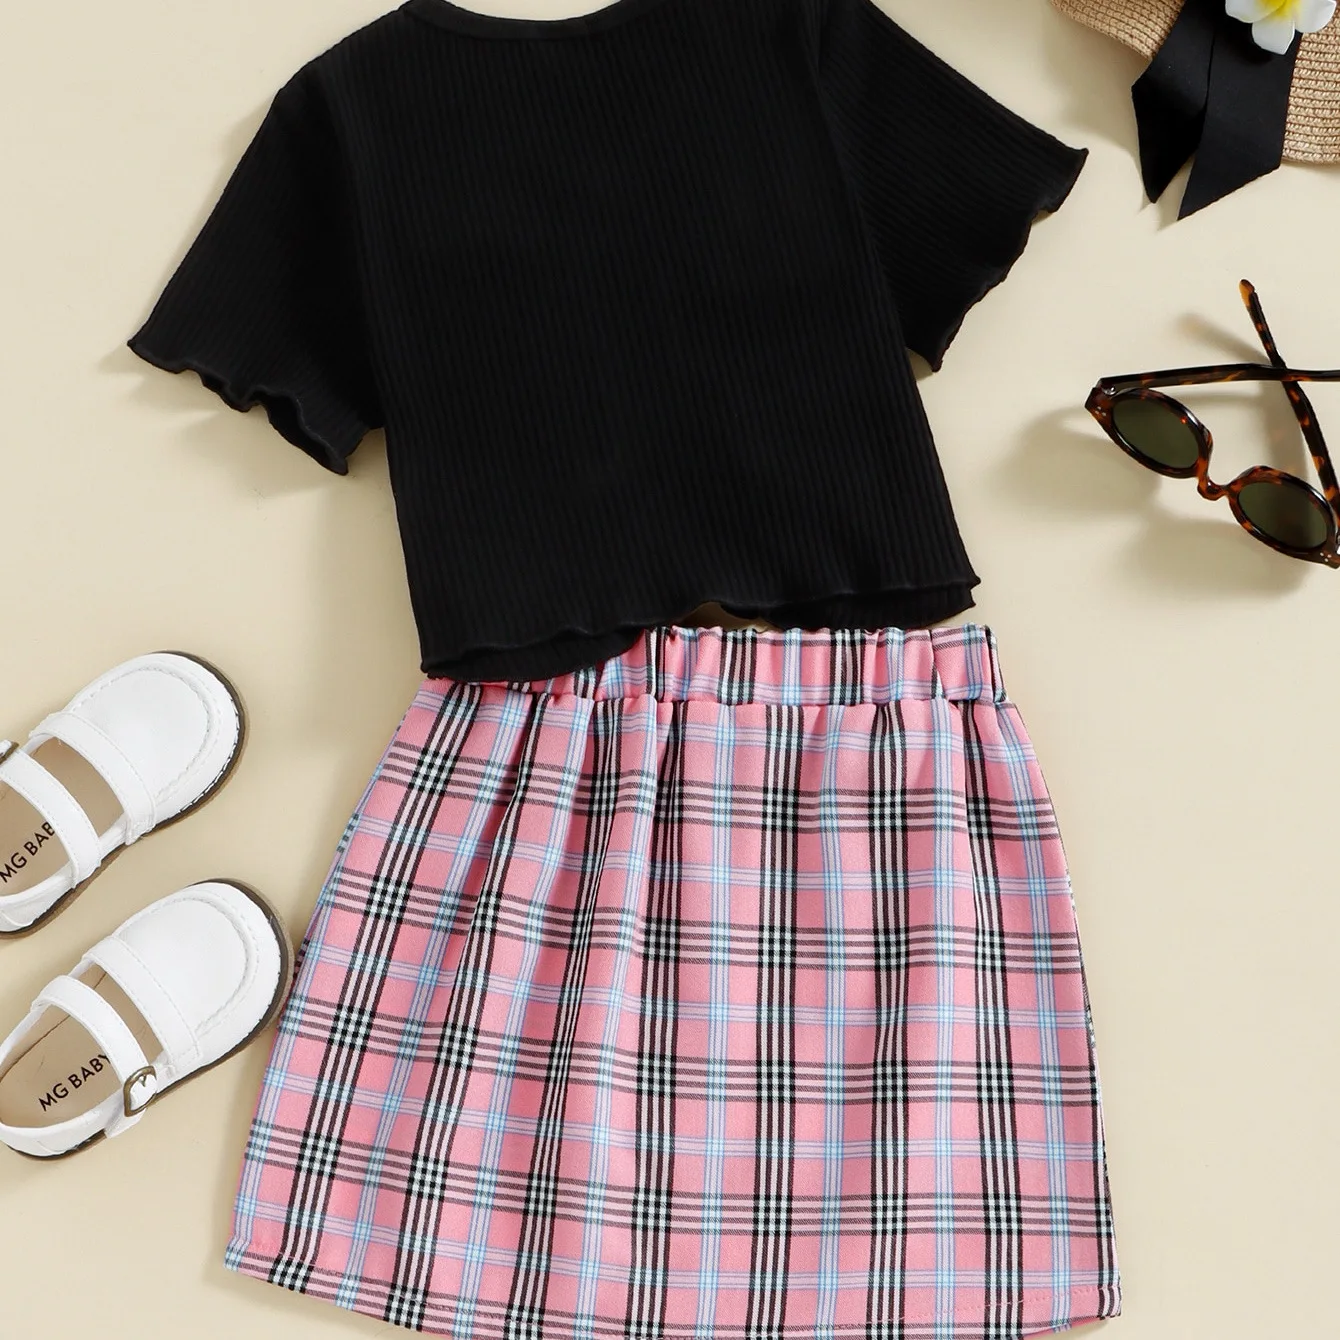 New arrival children clothes short sleeve shirt+plaid button skirt kids clothing fashion toddler baby girls outfits